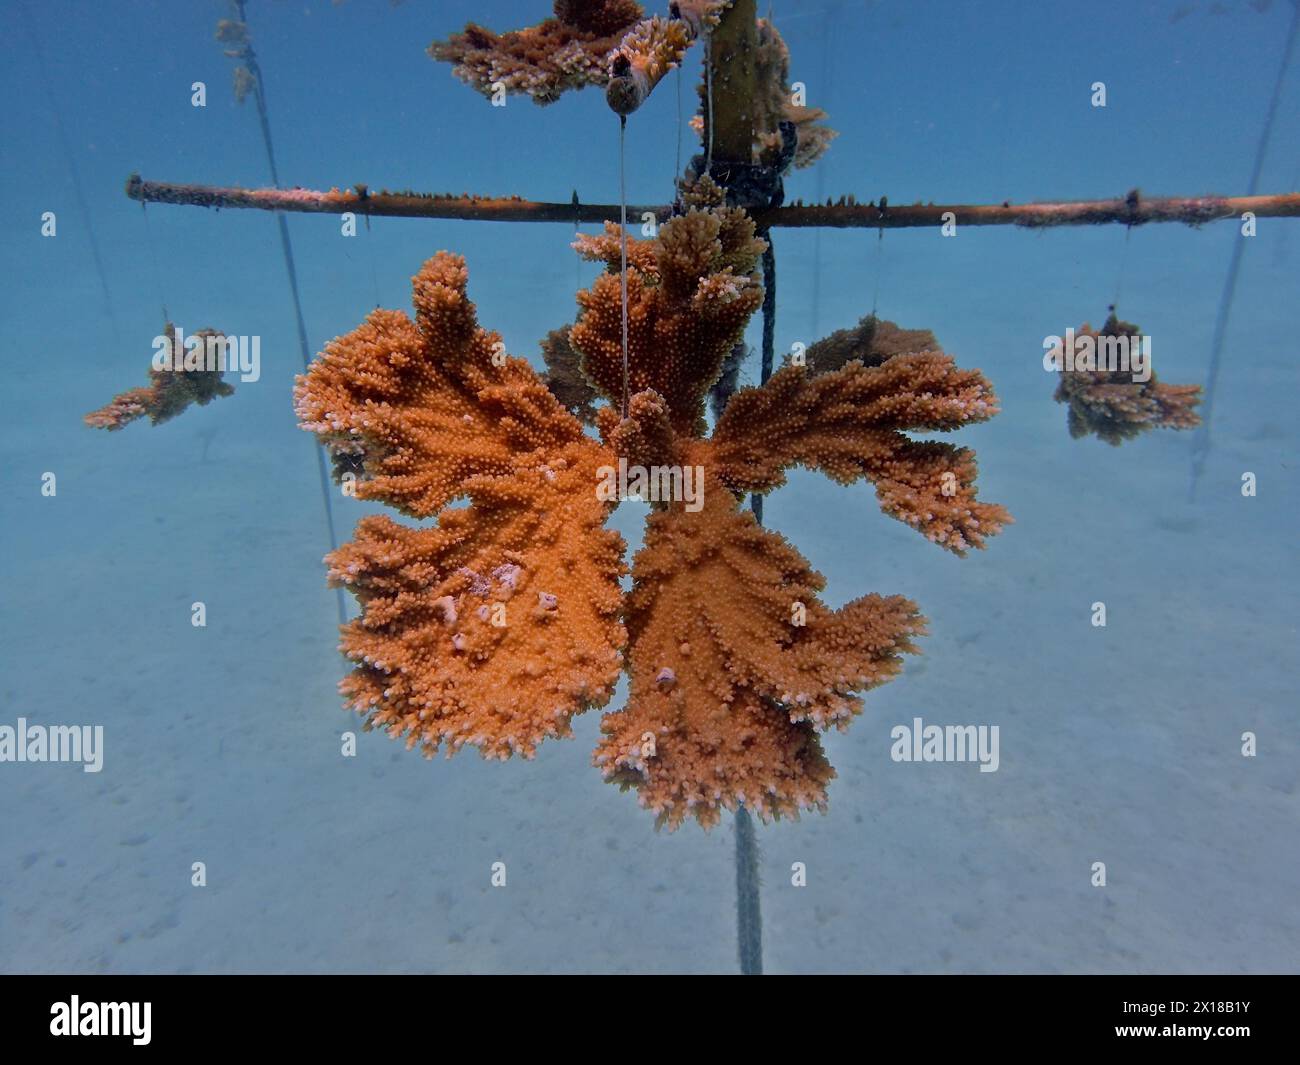 Coral culture. Magnificently grown specimen of elkhorn coral (Acropora palmata) on the rack, ready to be cut into pieces and then placed on the reef. Stock Photo